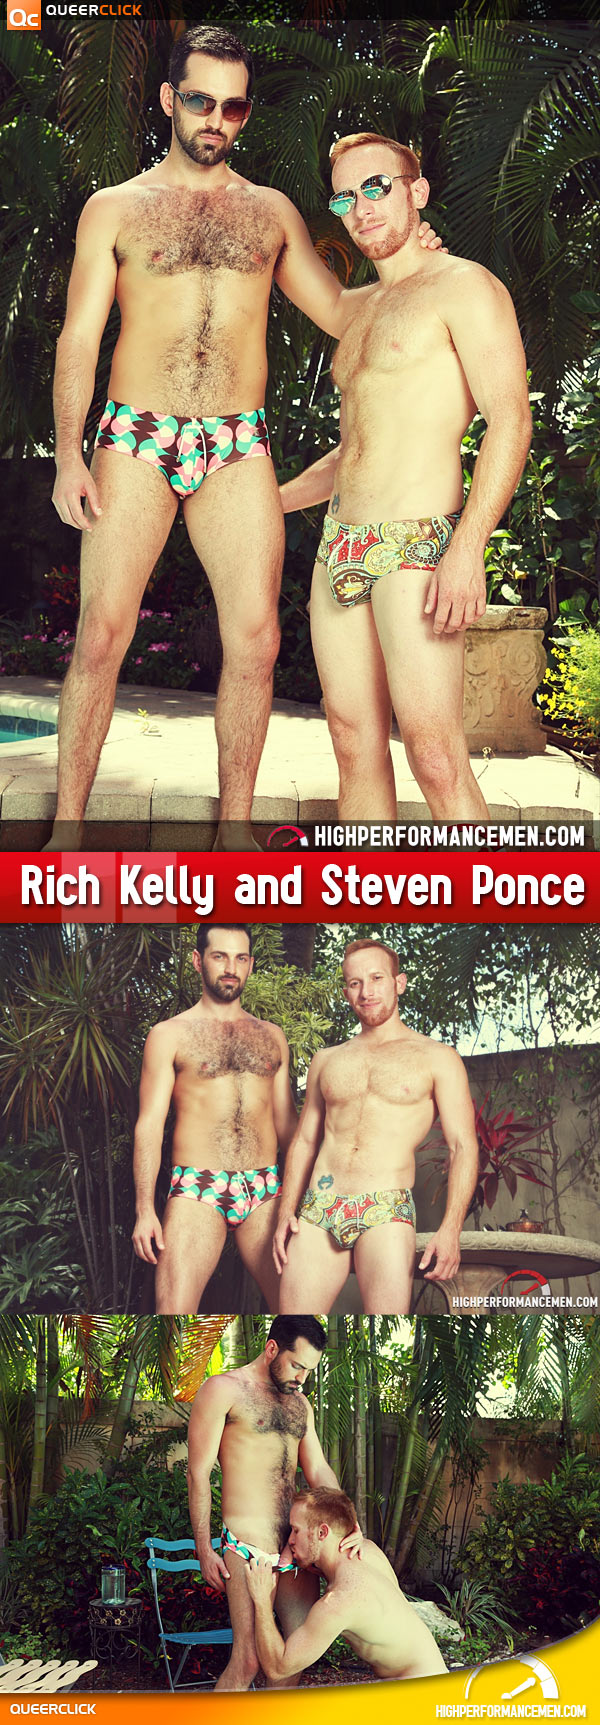 High Performance Men: Rich Kelly and Steven Ponce